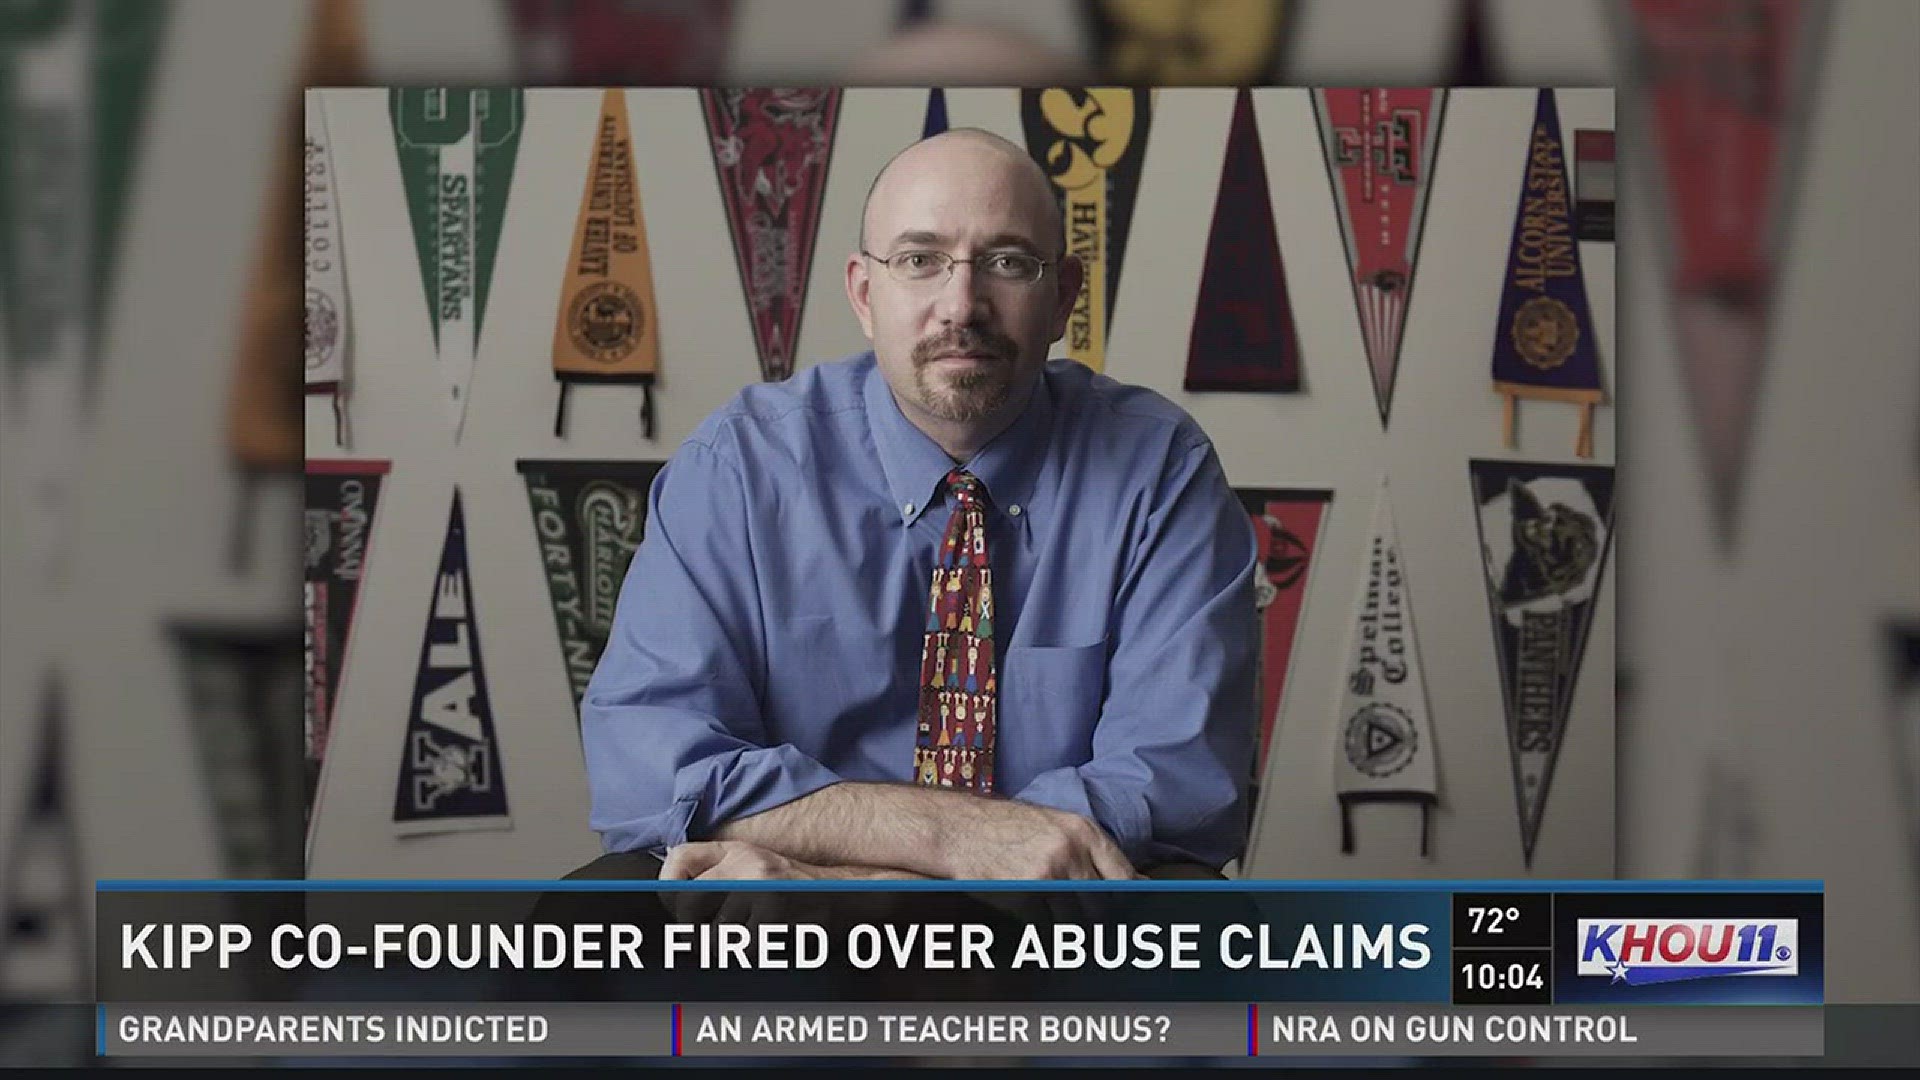 KIPP Houston Public Schools has fired its co-founder, Mike Feinberg, after an investigation revealed "credible evidence" of sexual misconduct.